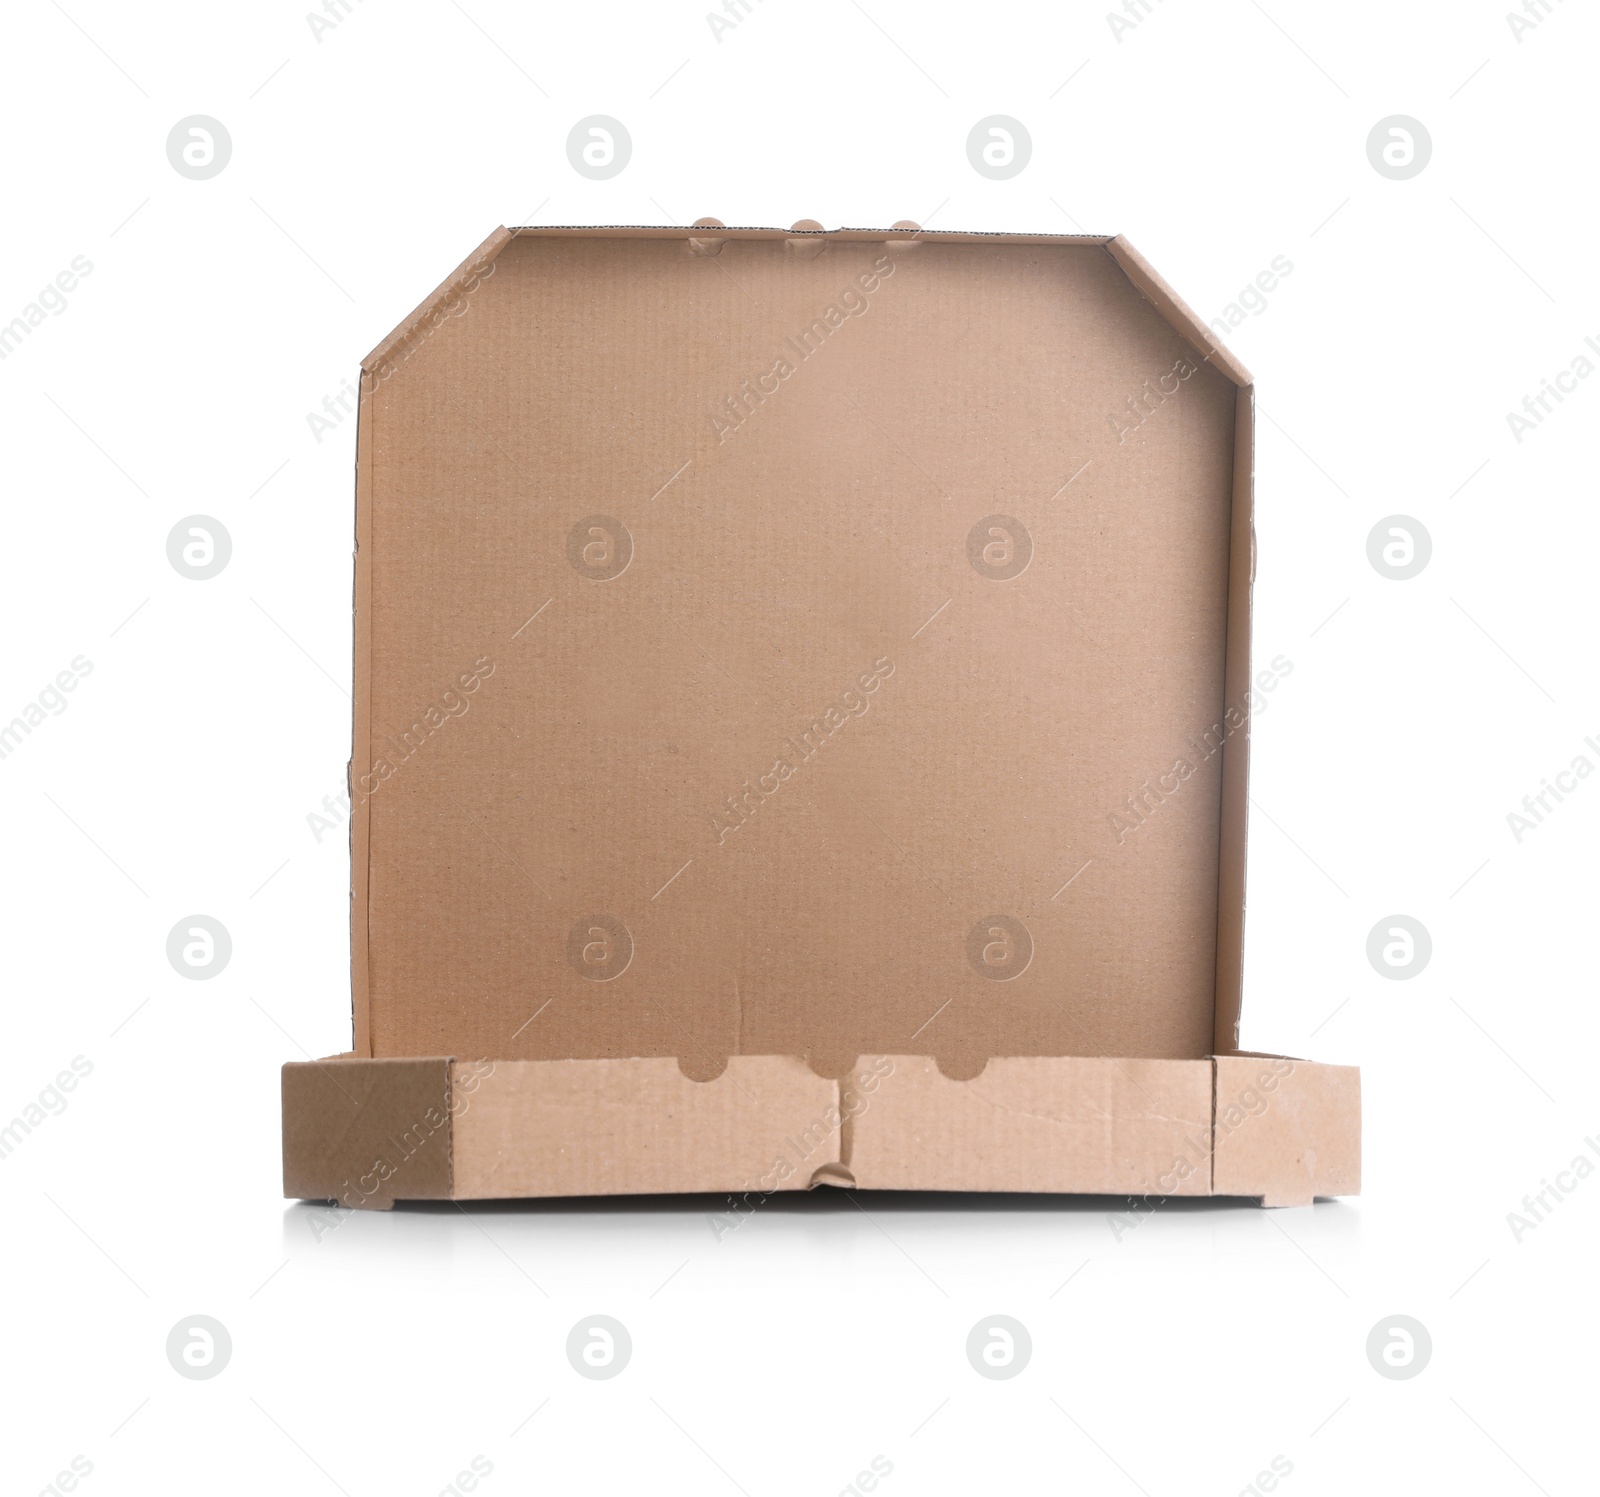 Photo of Open cardboard pizza box on white background. Mockup for design